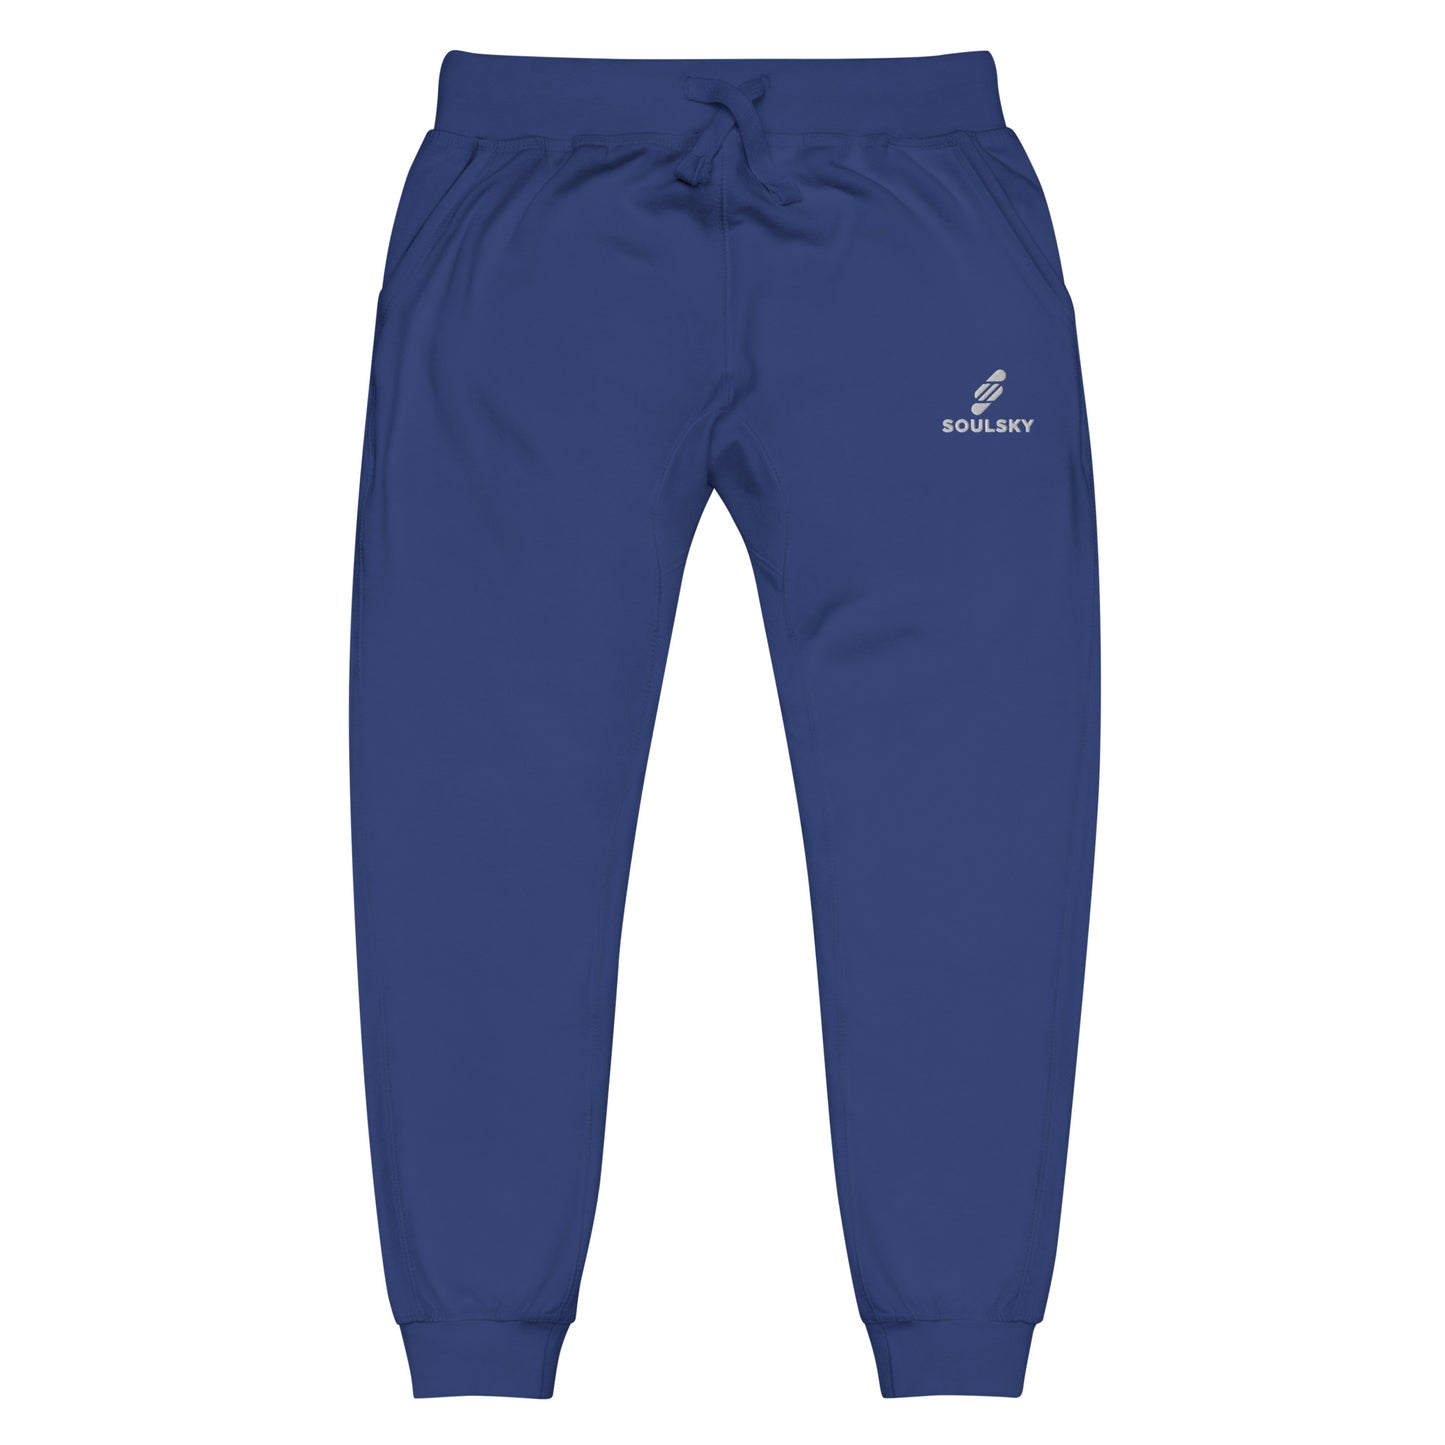 Royal blue unisex joggers with white embroidered logo on left thigh that says "SOULSKY".